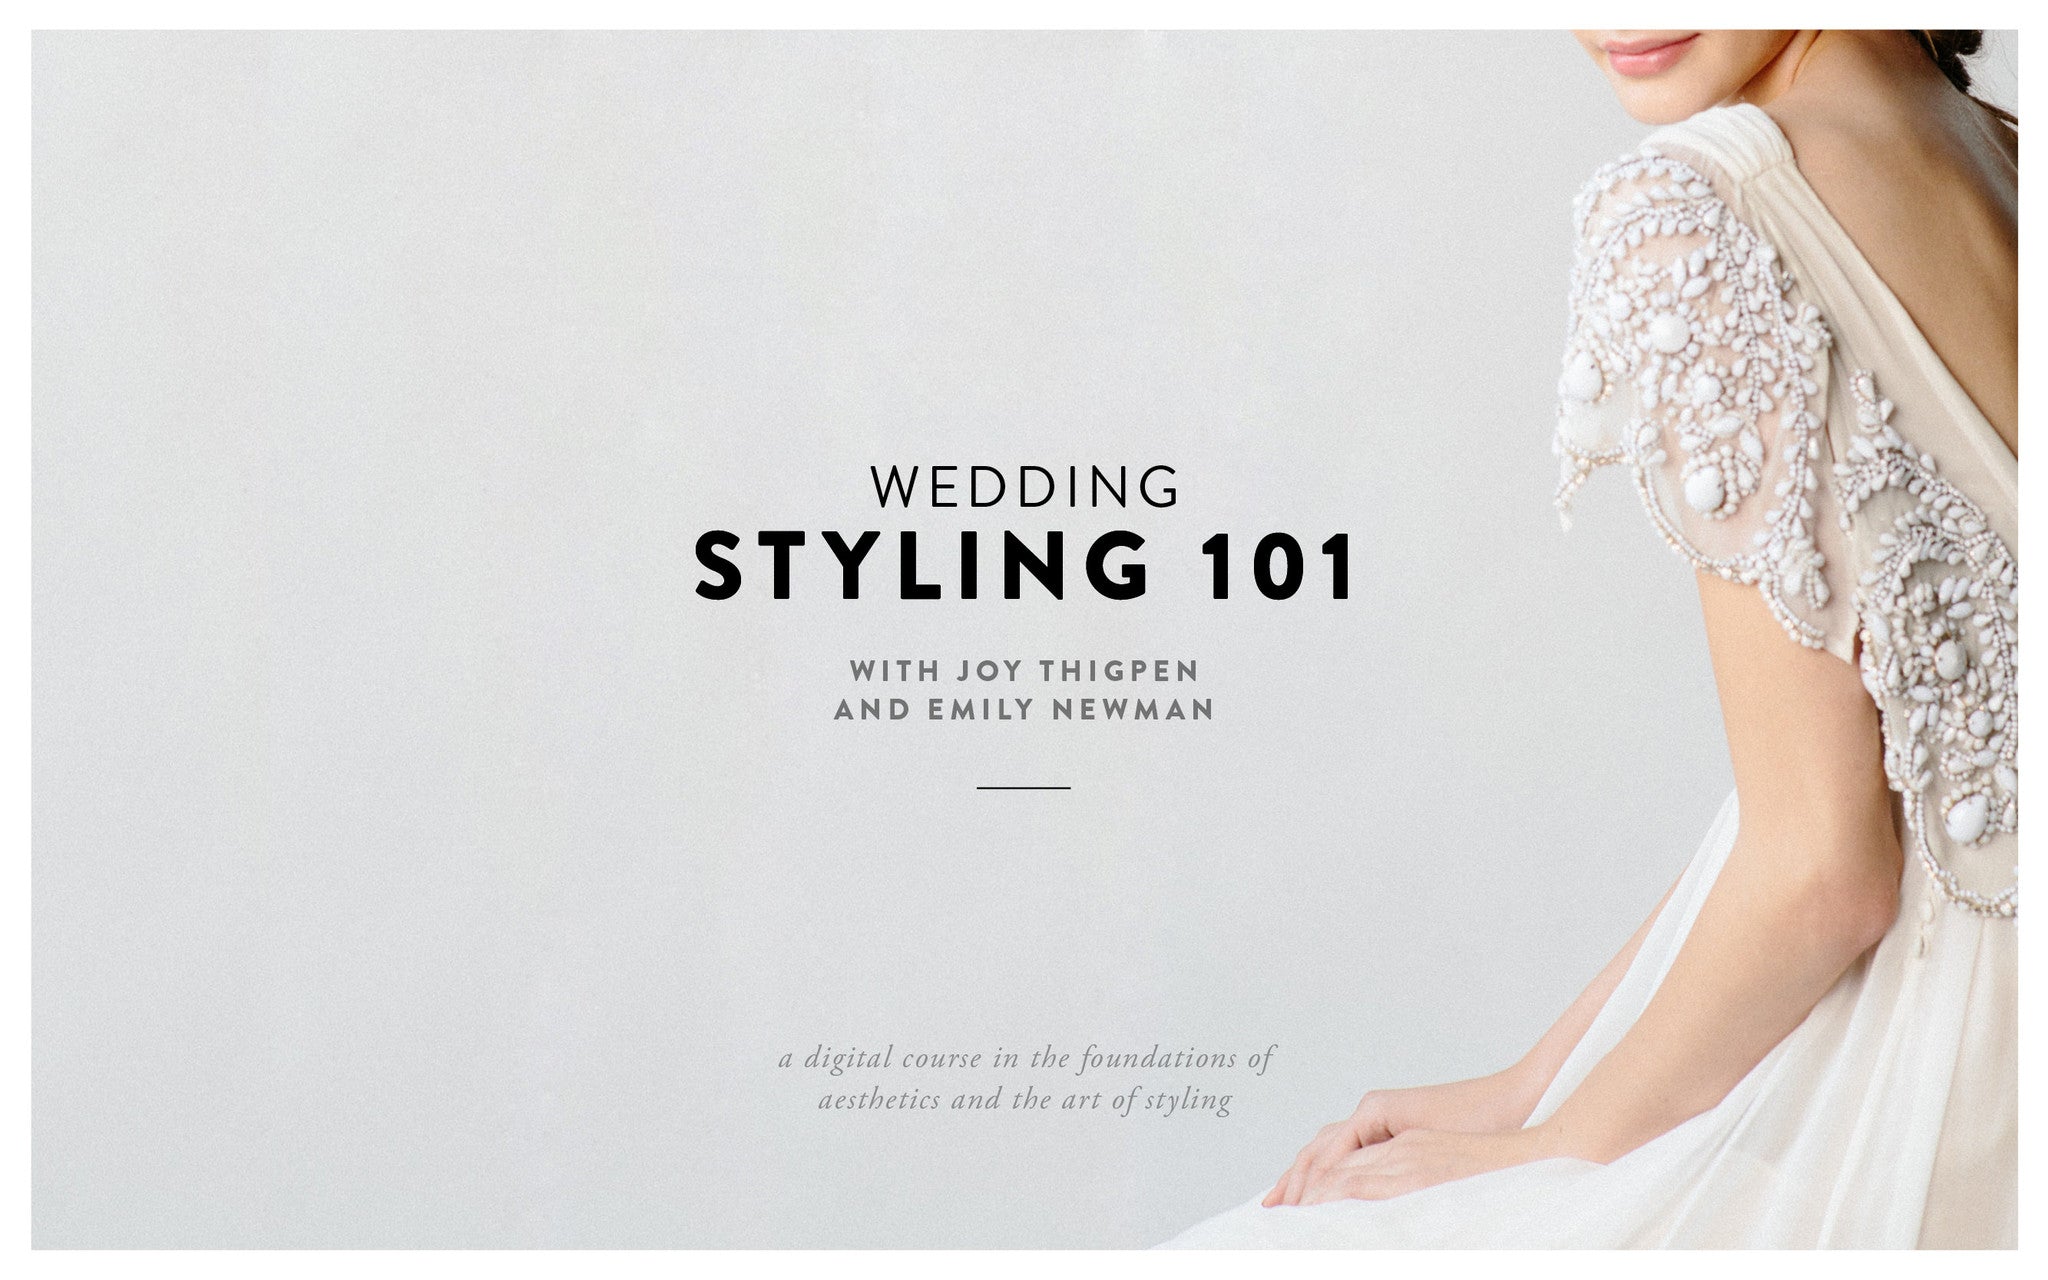 Wedding Styling 101 with Joy Thigpen (RPP) - 6 payments of $99